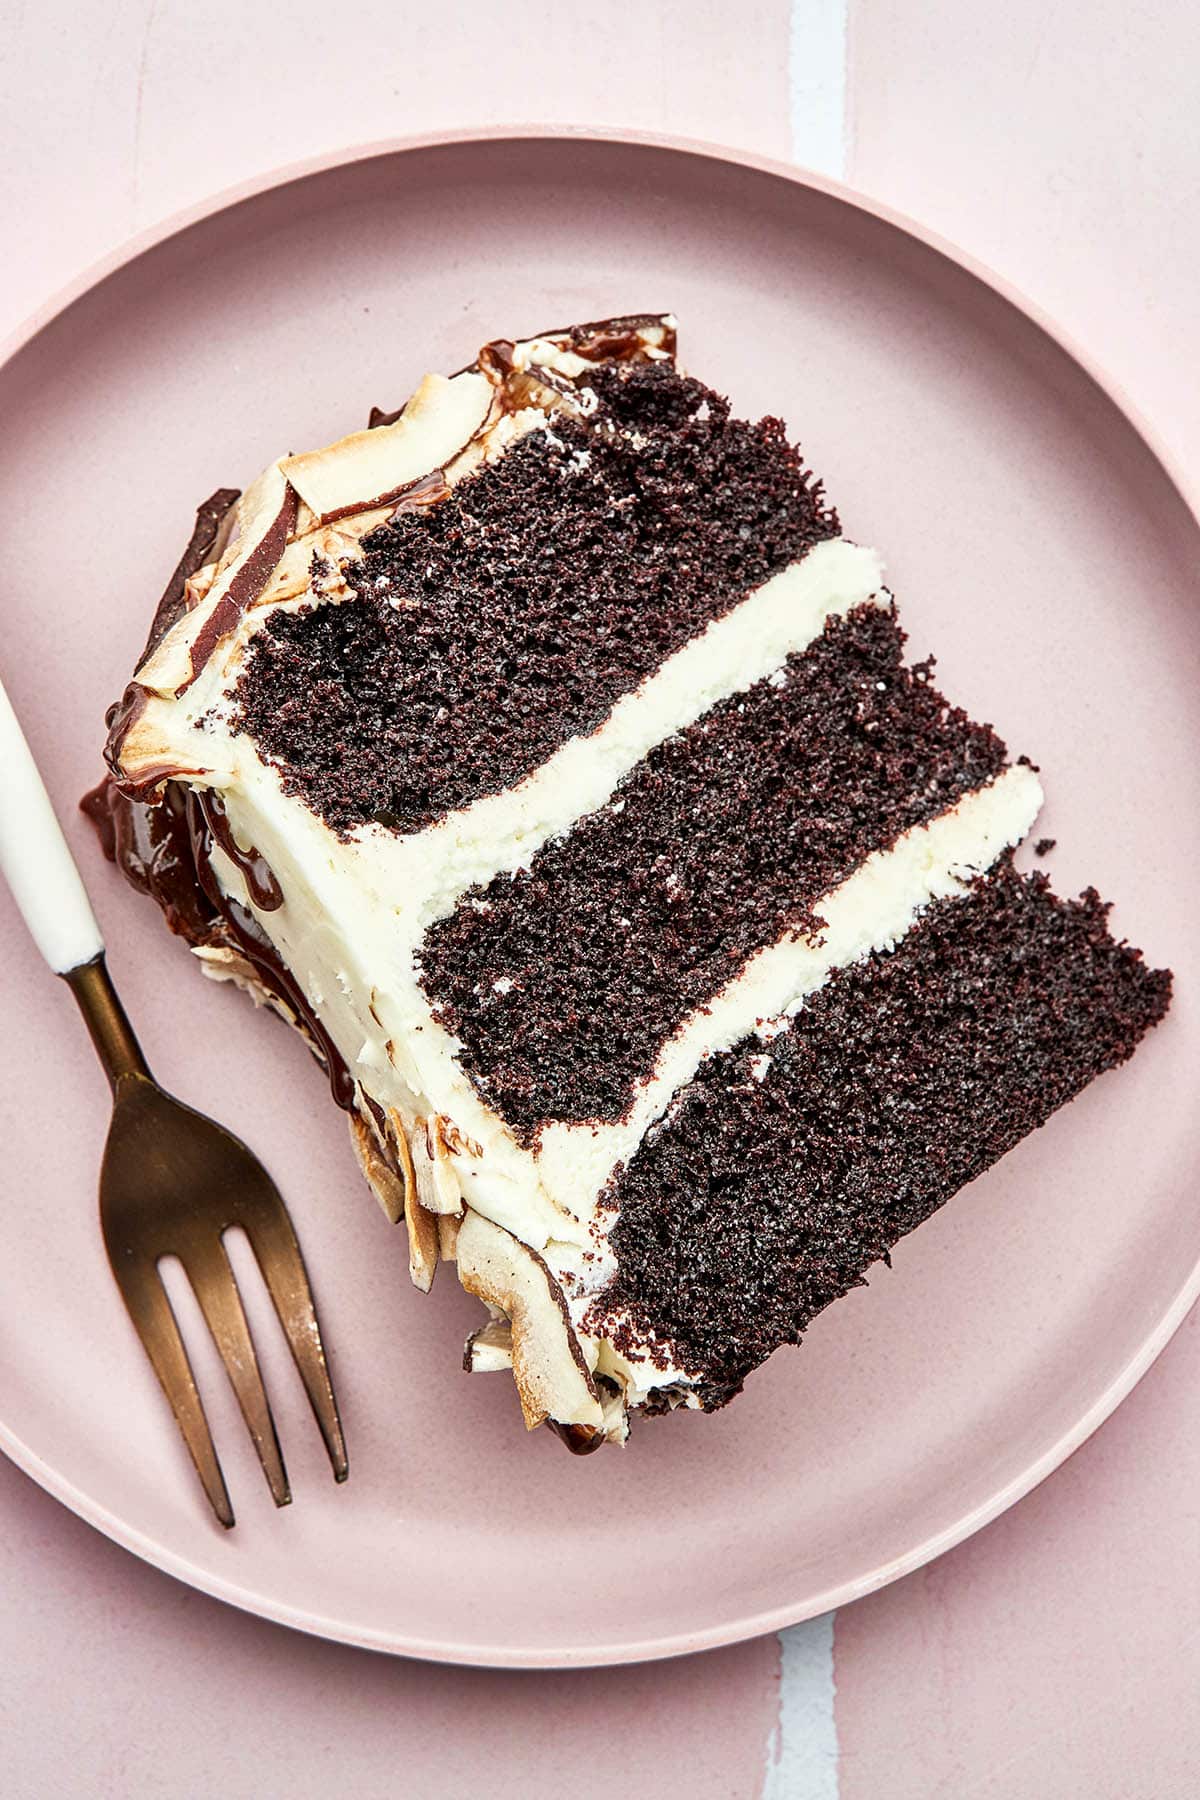 A slice of 3-layer chocolate cake with white frosting and coconut.